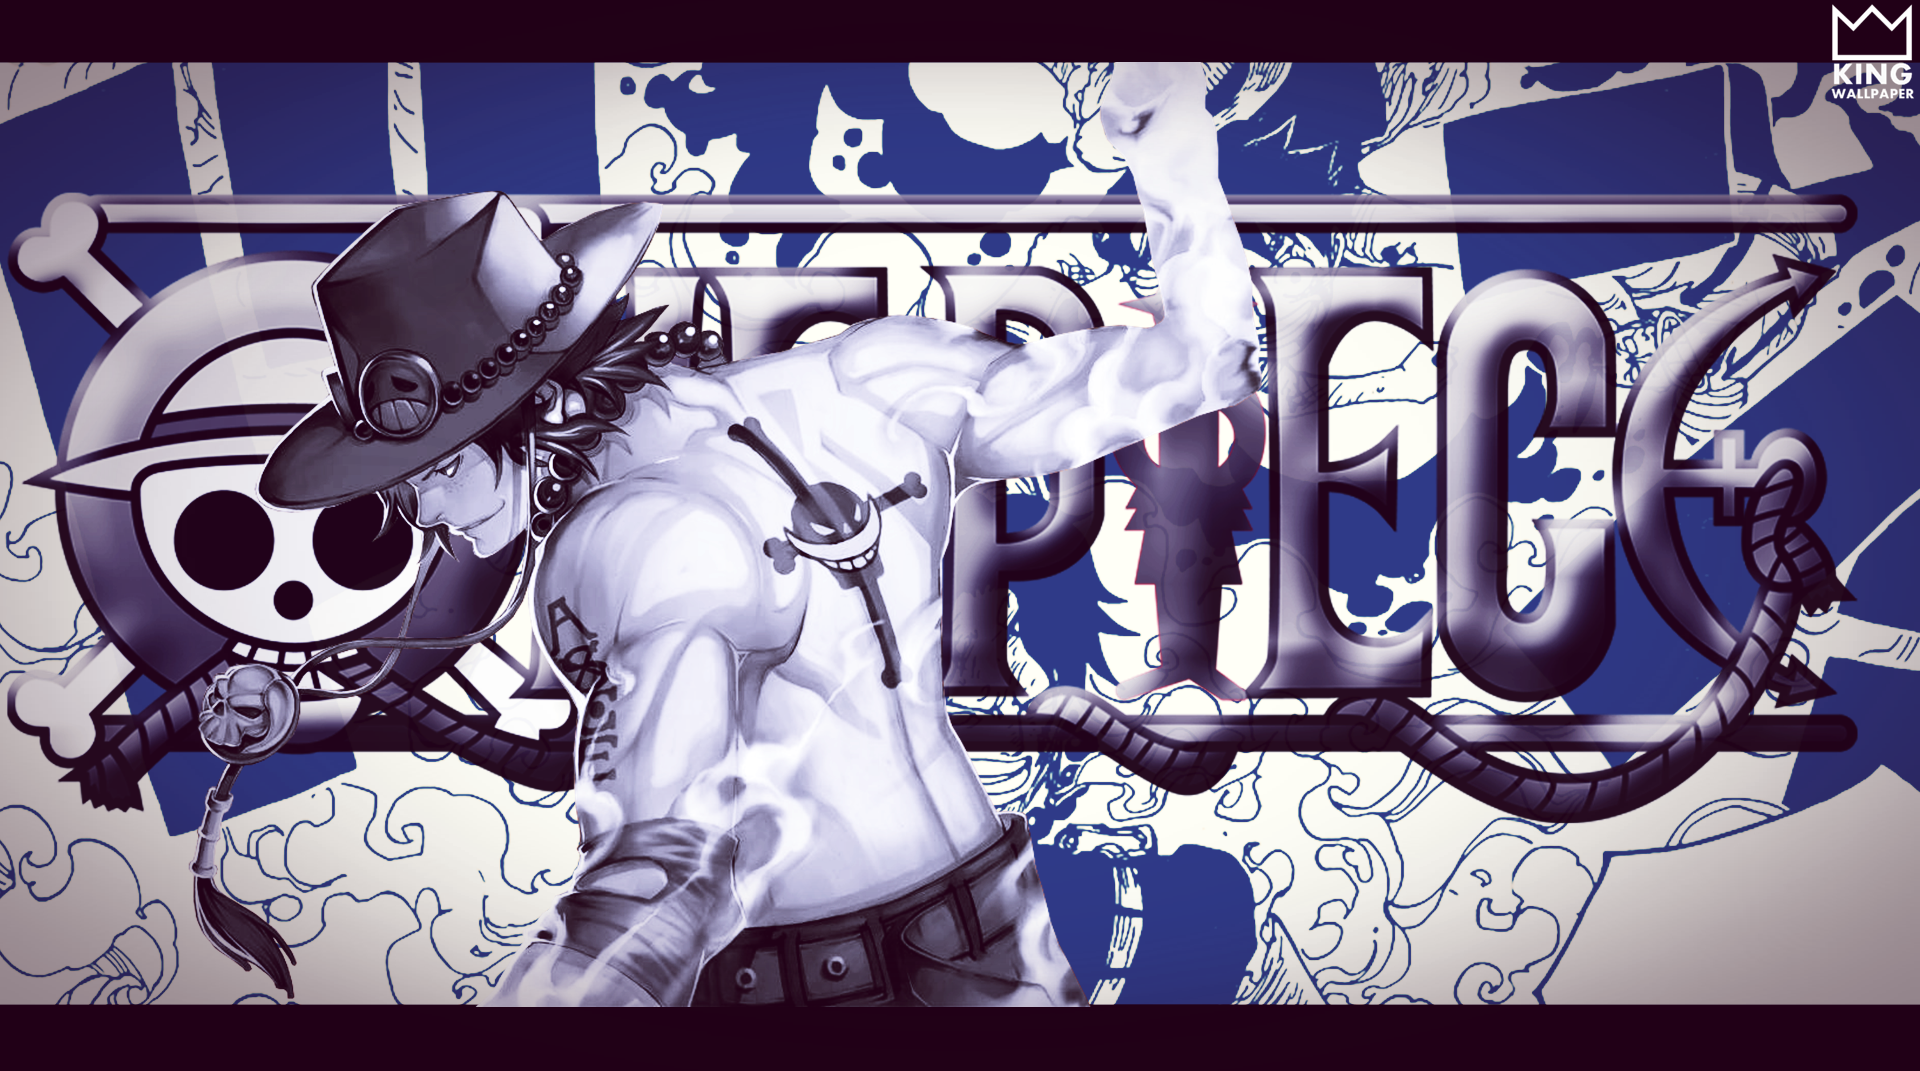 Portgas Ace Cool One Piece Wallpapers